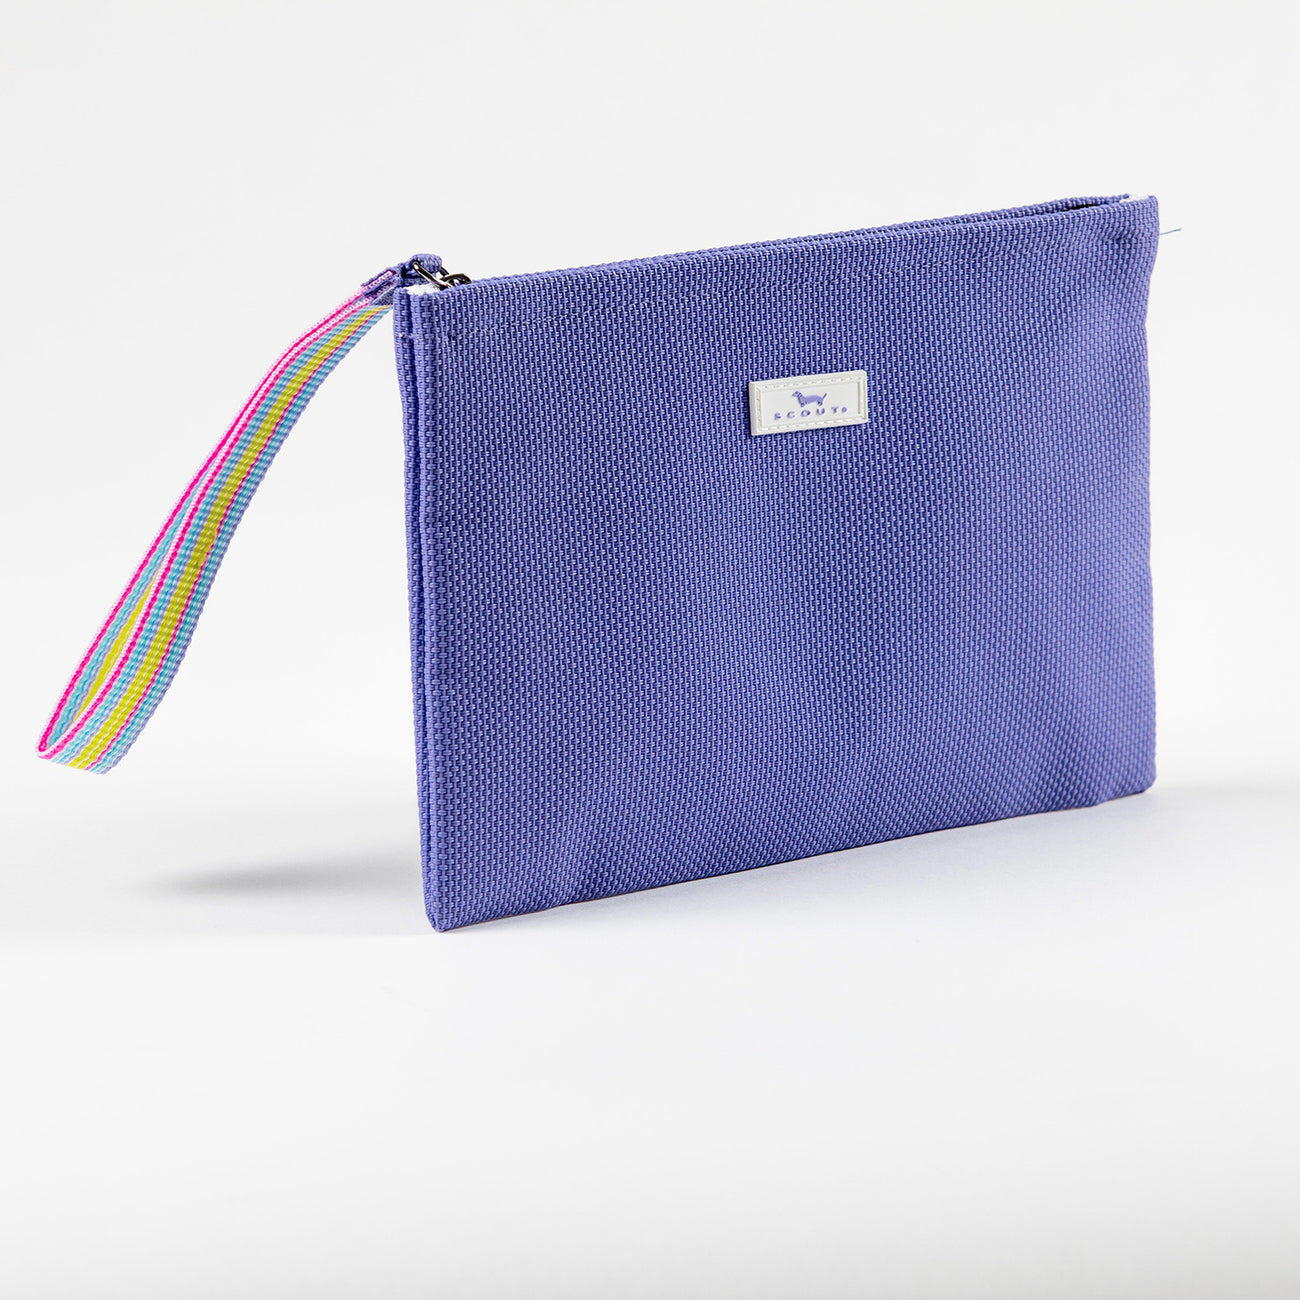 Amethyst Cabana Clutch by Scout